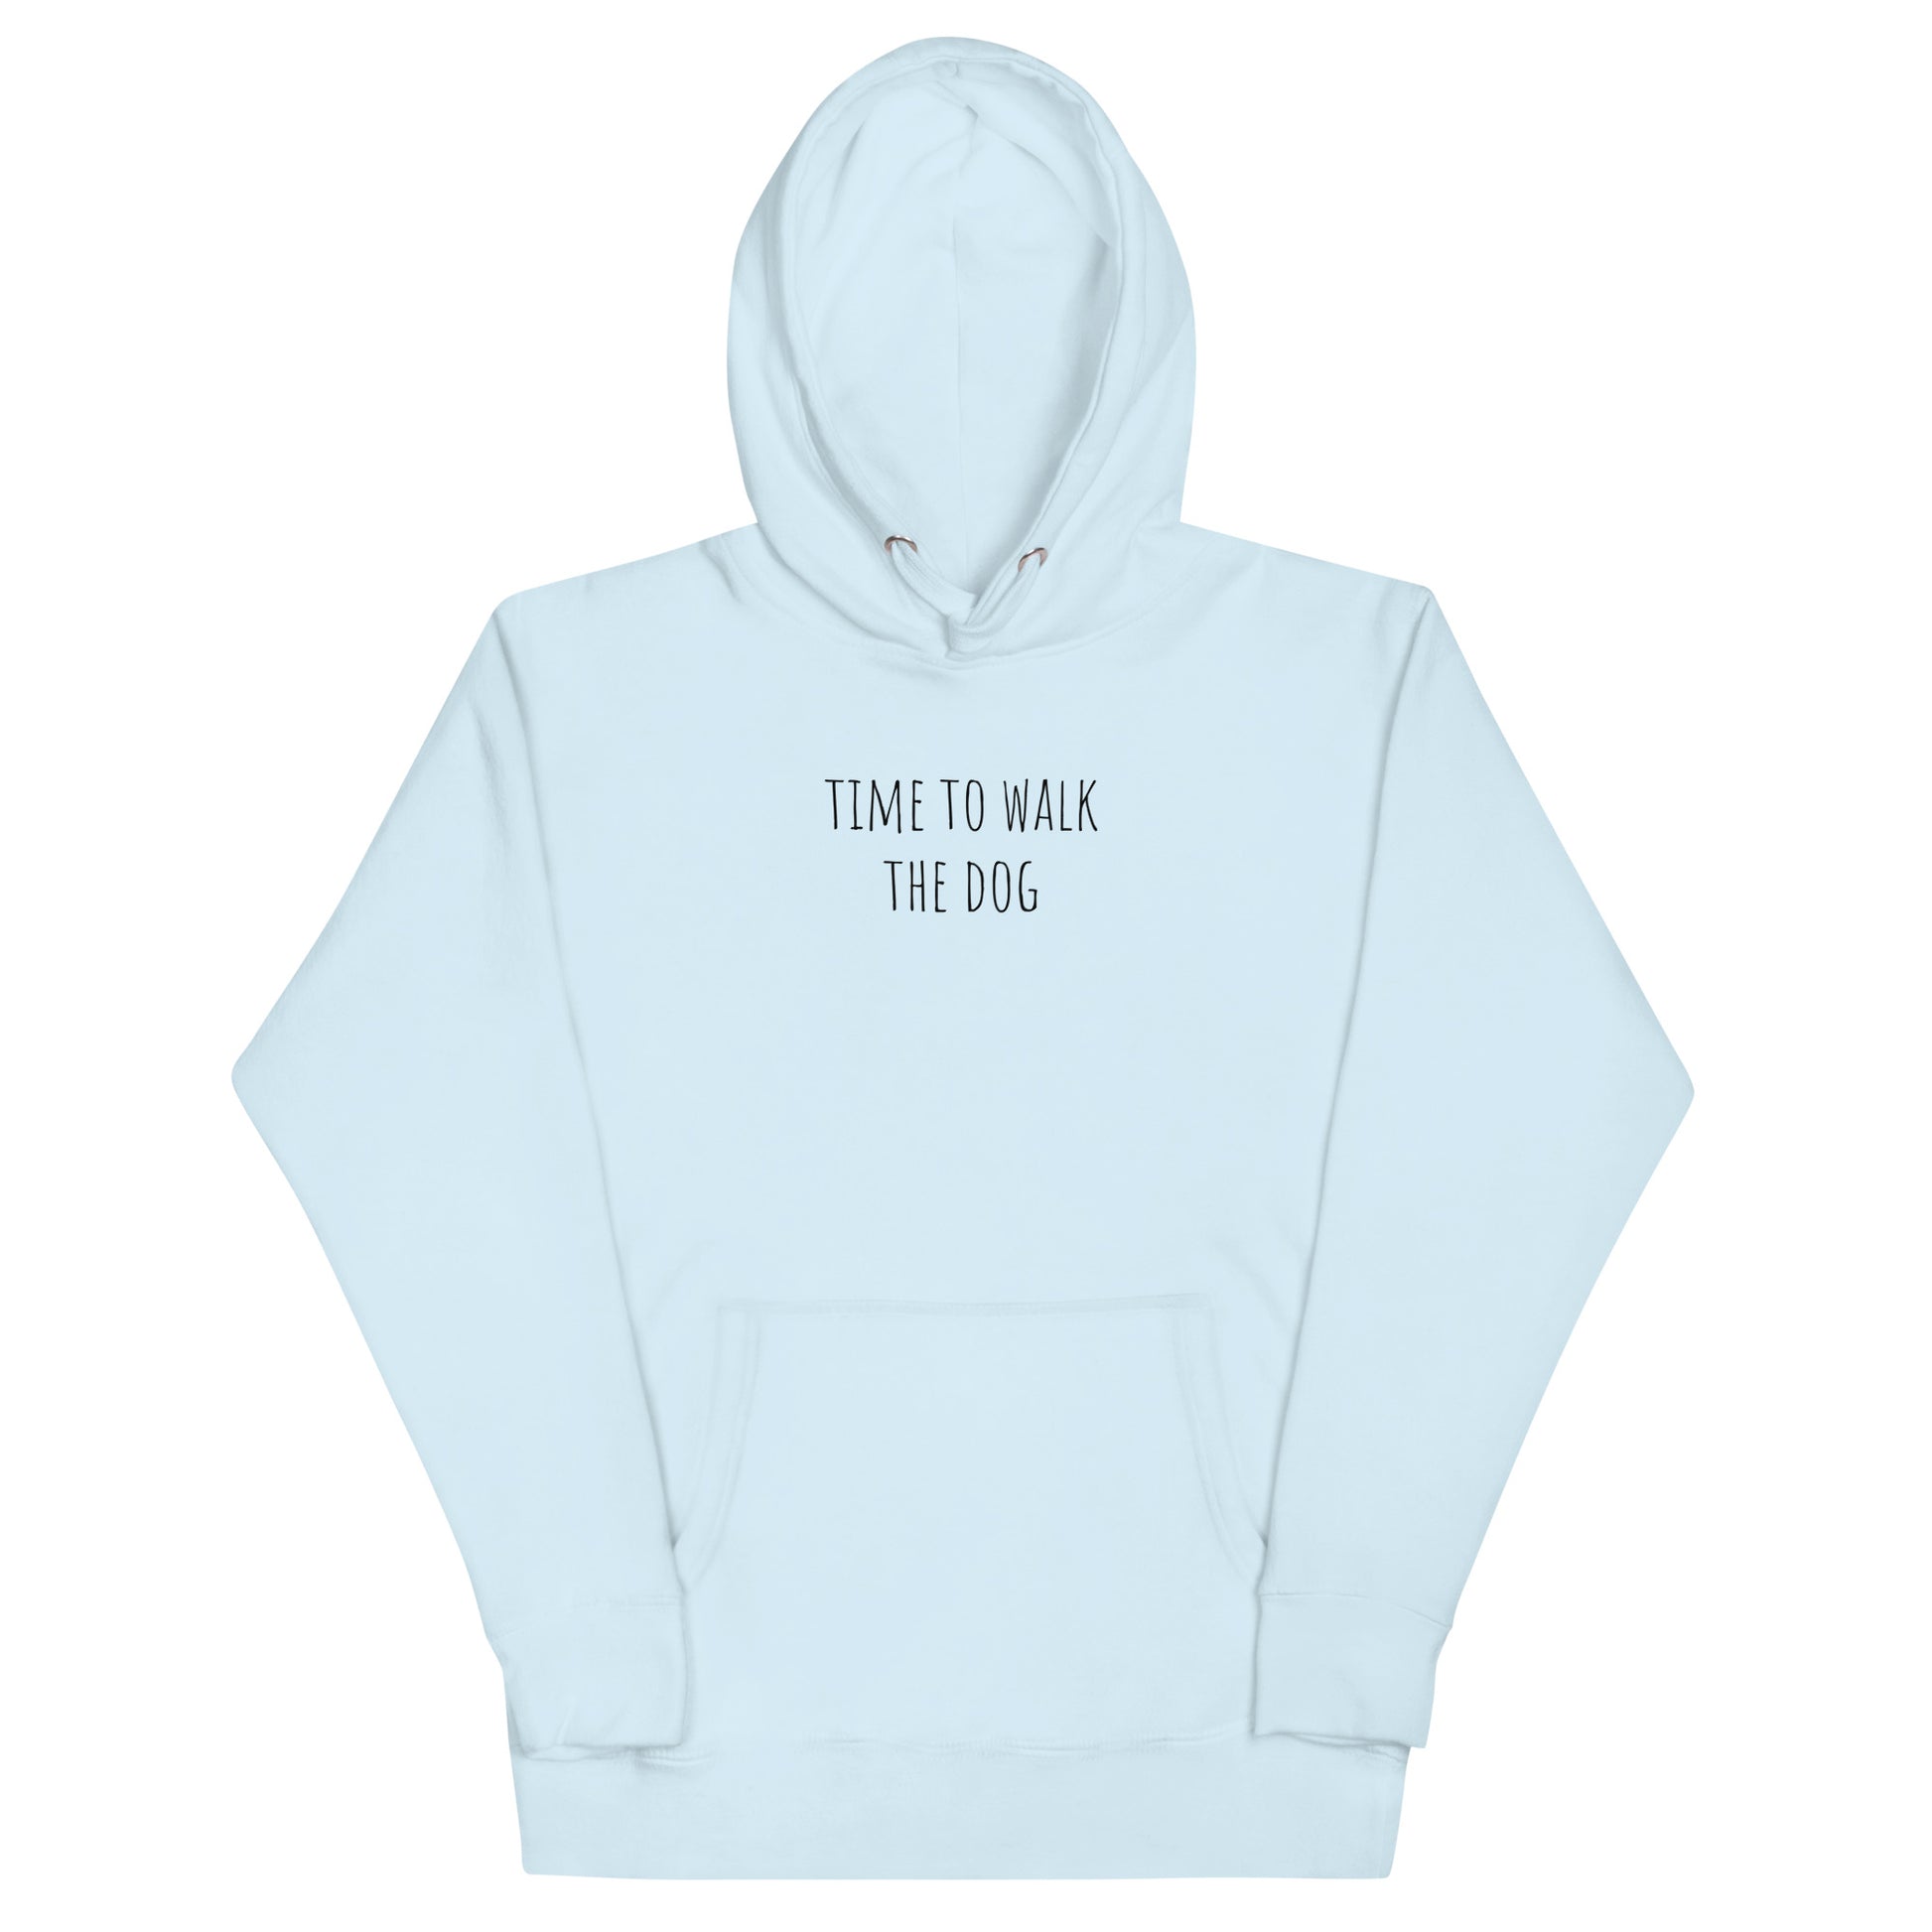 Time to walk the dog German Shepherd lover hoodie light blue color - GSD Colony